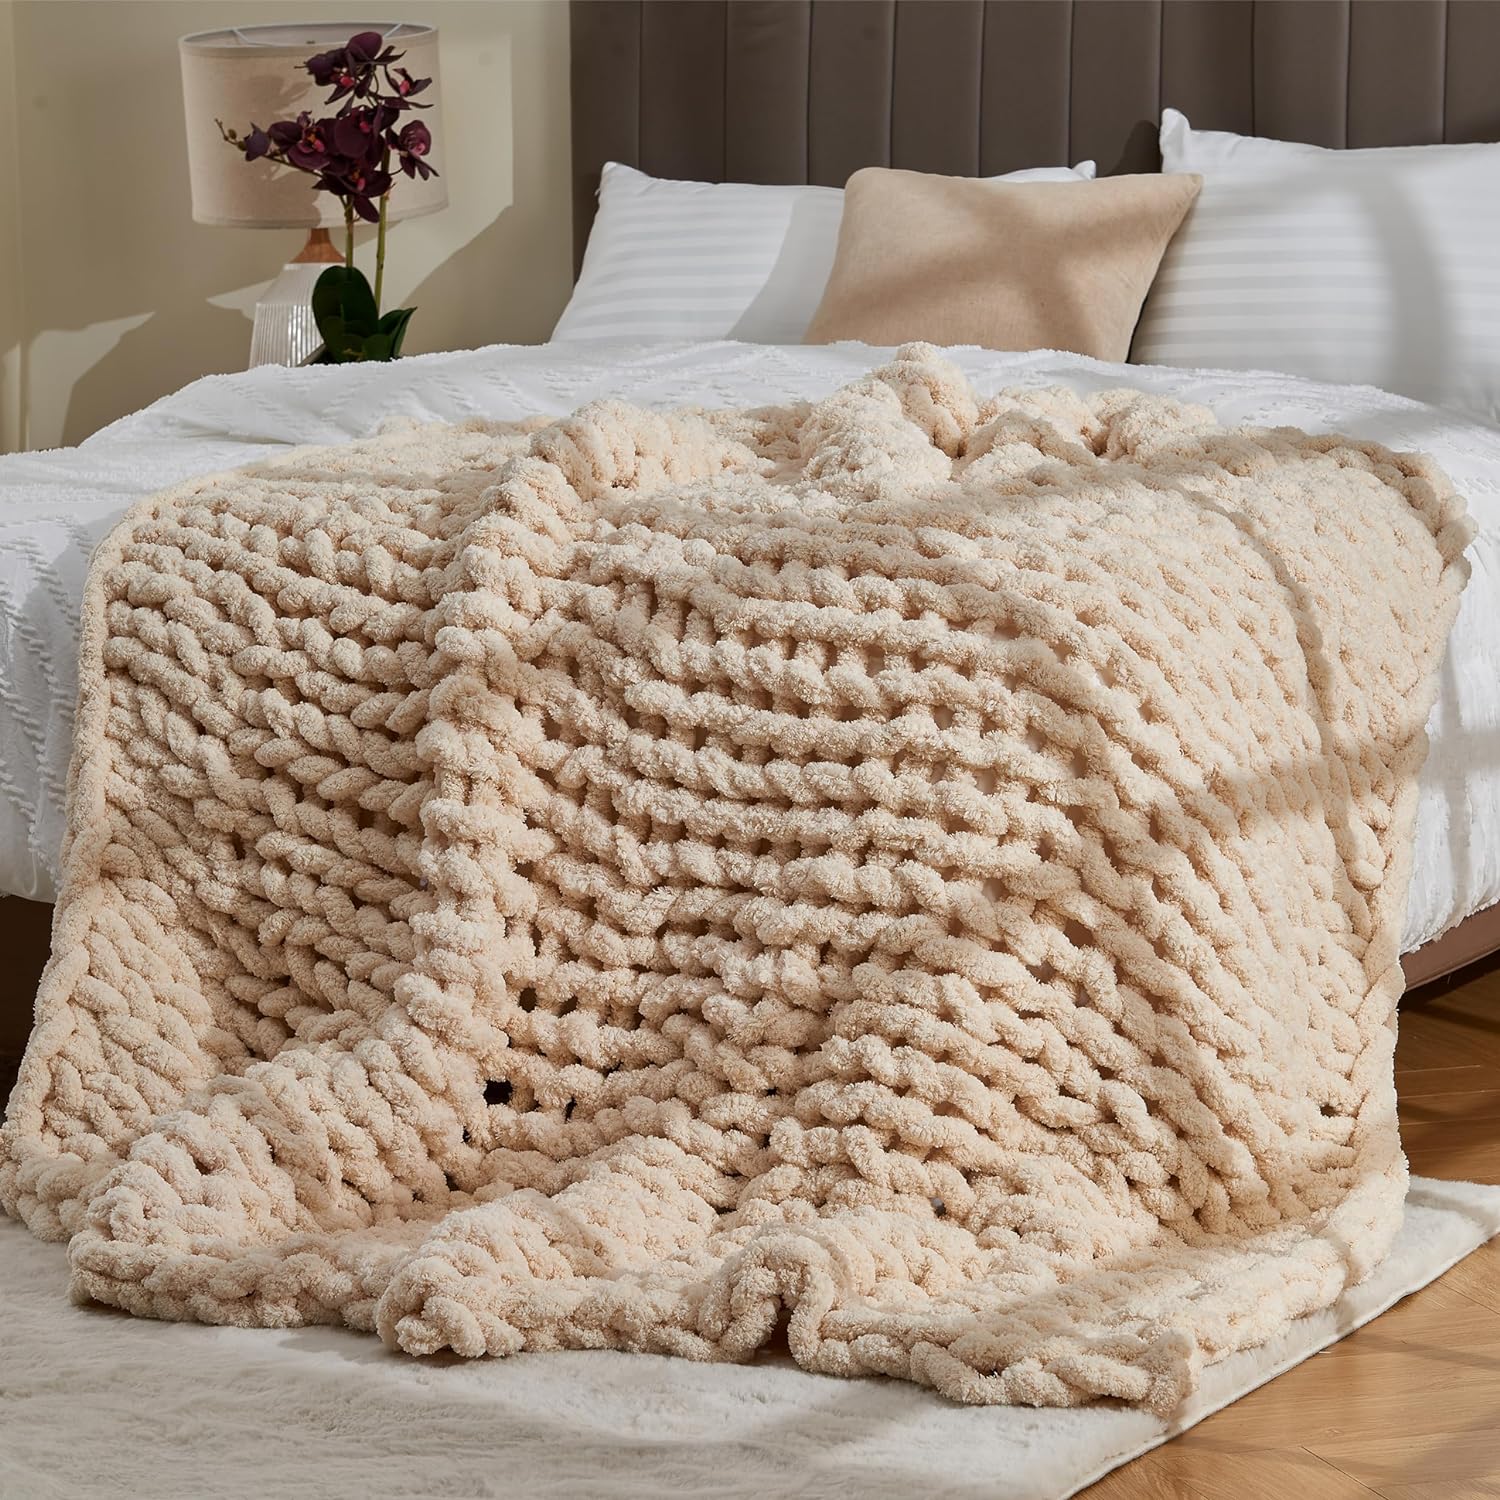 Great Choice Products Chunky Knit Soft Throw Blanket - Cream - Chunky Chenille Cable Knitted Fluffy & Warm Chunky Throw Blanket With Woven Bag…